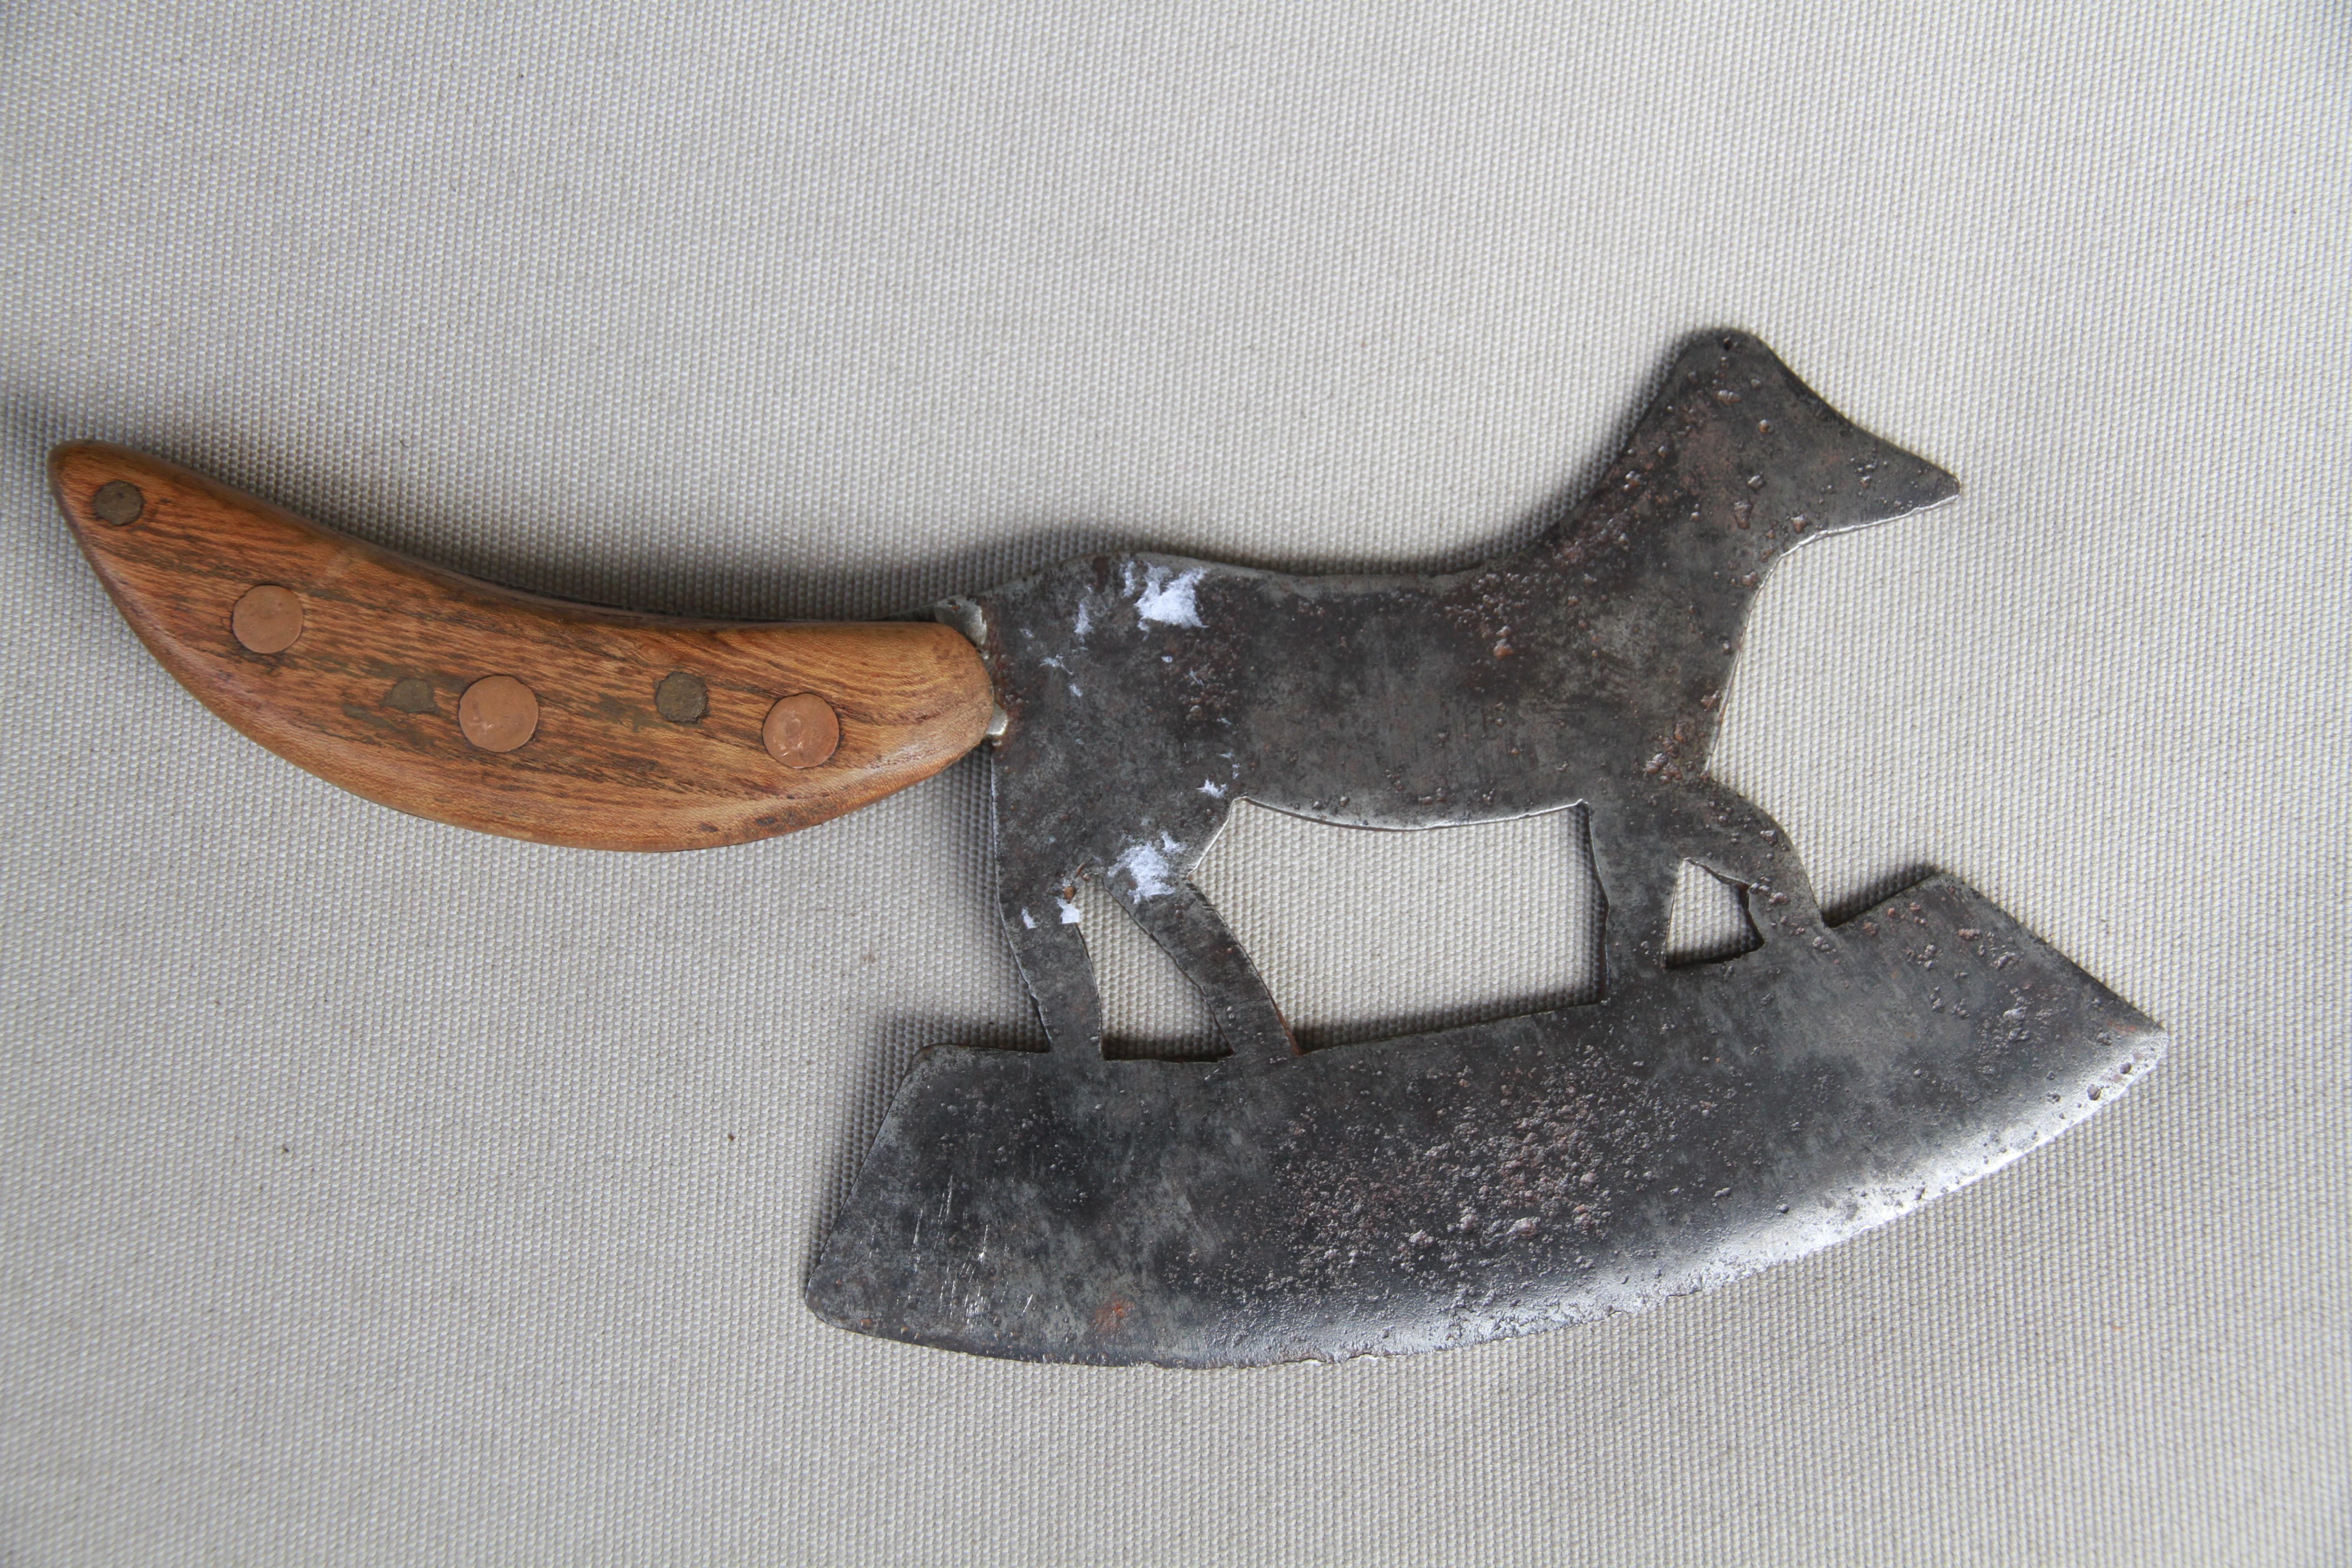 A delightful figurative butcher's cleaver from France in the shape of a fox. With a 7.25 inch blade, the integral handle has wooden scales attached with copper rivets.